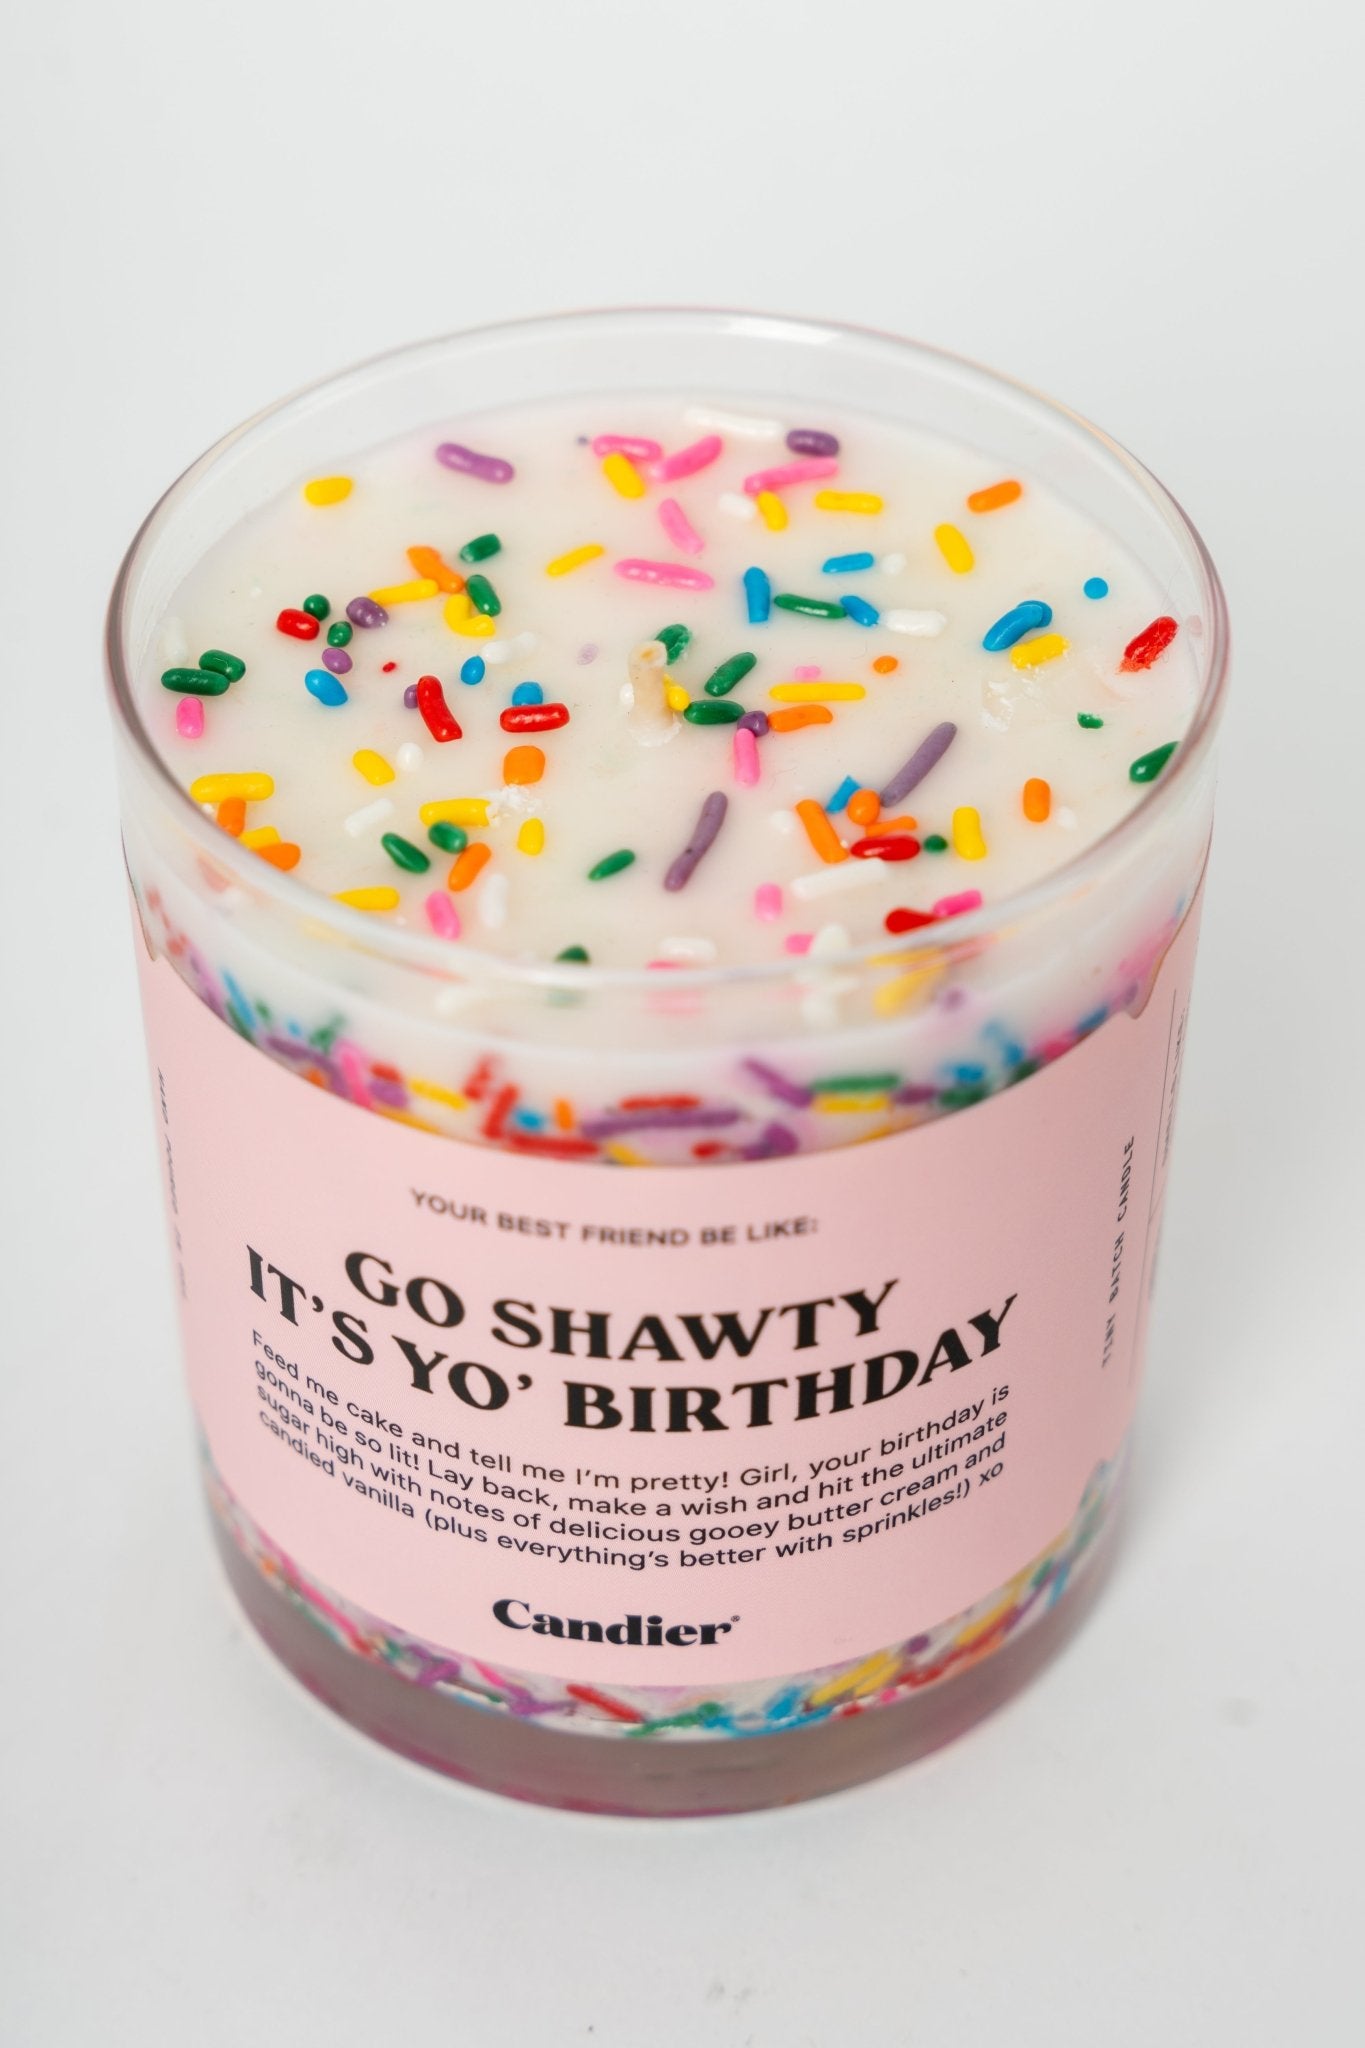 Go shawty, it's your birthday Candier 9 oz candle - Trendy Candles and Scents at Lush Fashion Lounge Boutique in Oklahoma City